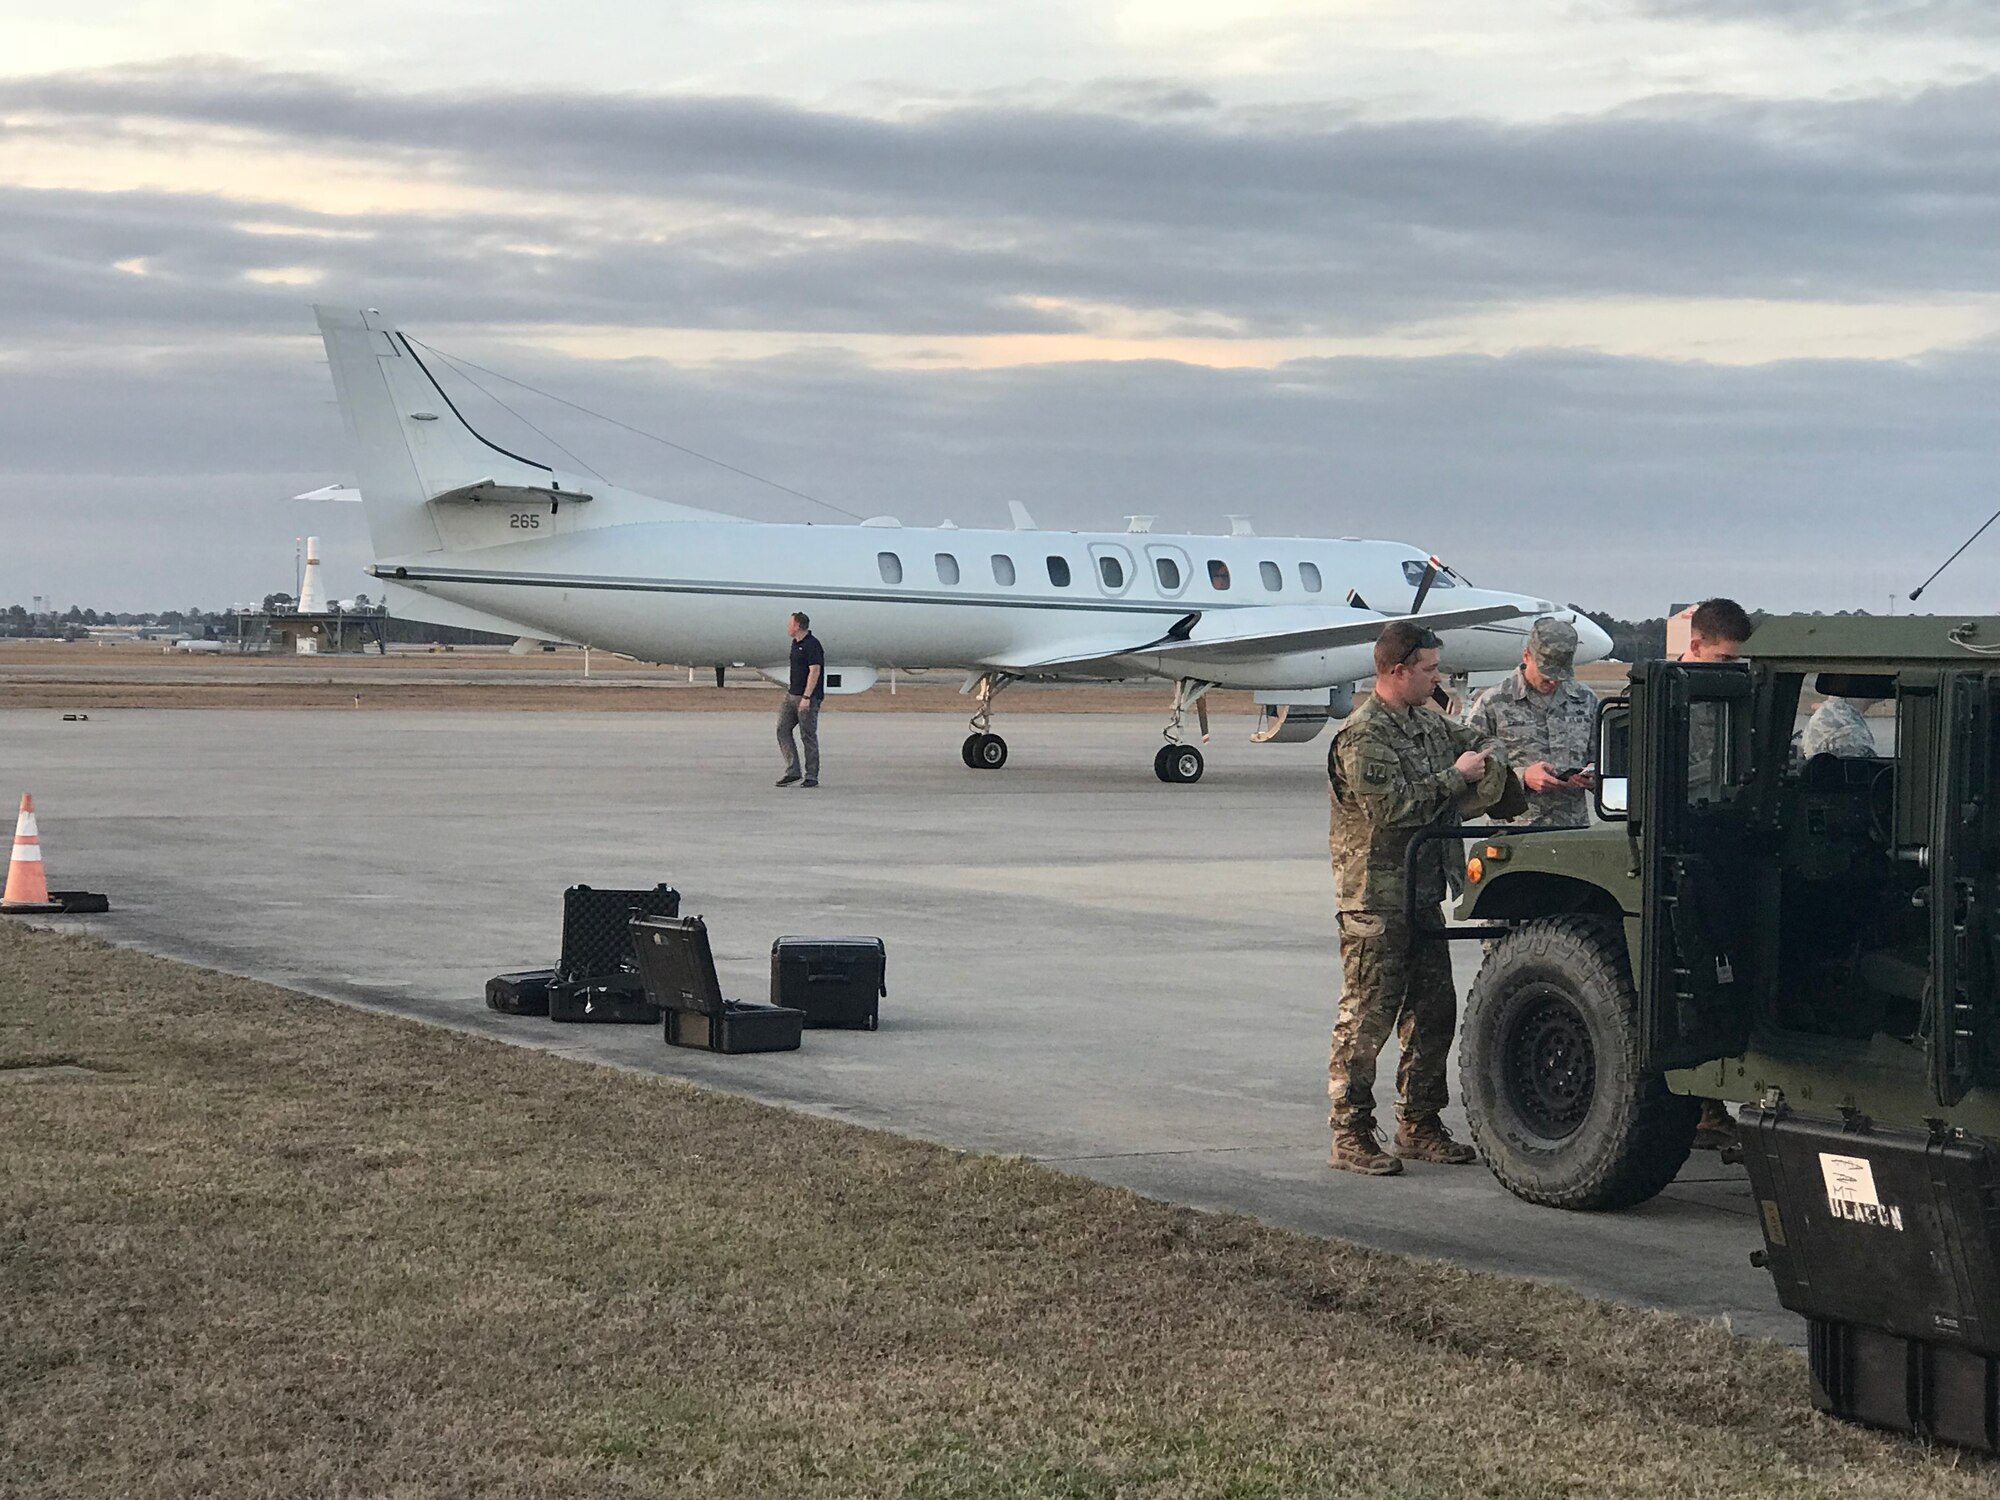 Eight Airmen with the 178th Intelligence, Surveillance and Reconnaissance Group temporarily deployed to Camp Shelby, Hattiesburg, Mississippi, on a mobile team in support of Patriot South, Feb. 13-15.